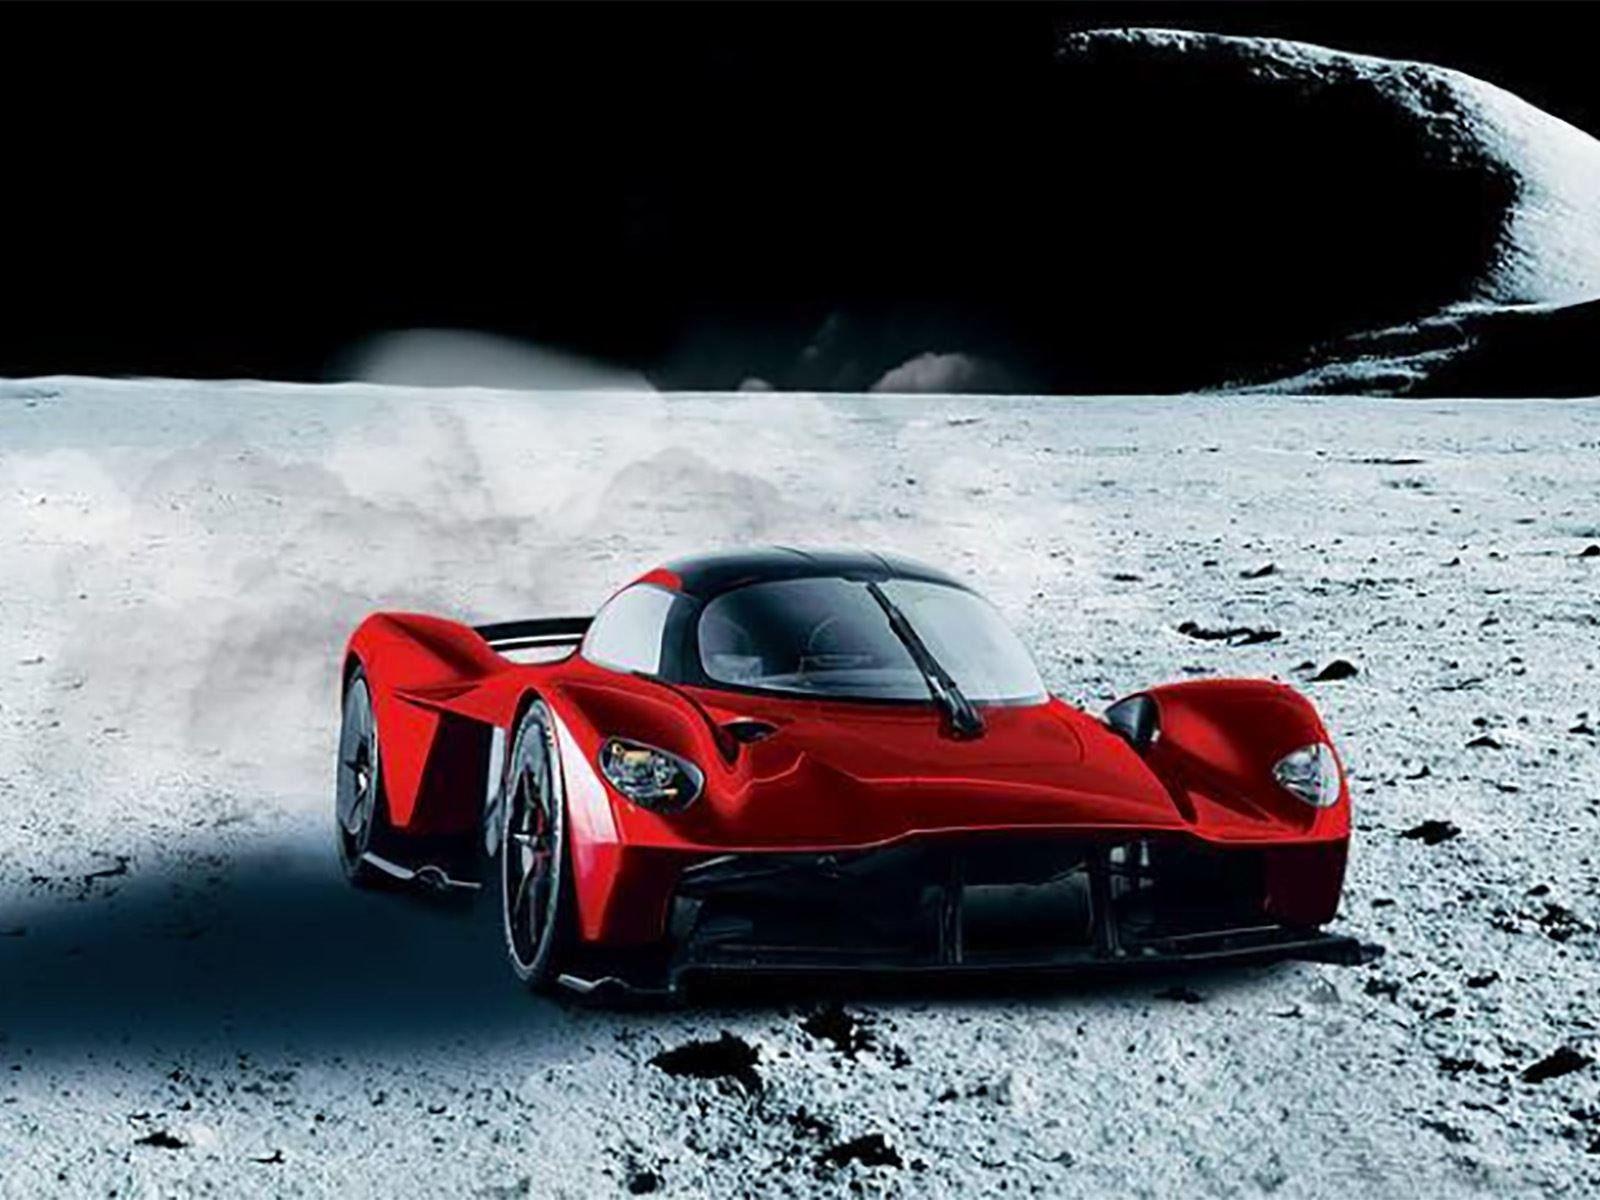 An Aston Martin Valkyrie Will Have Real Moon Dust In Its Paint